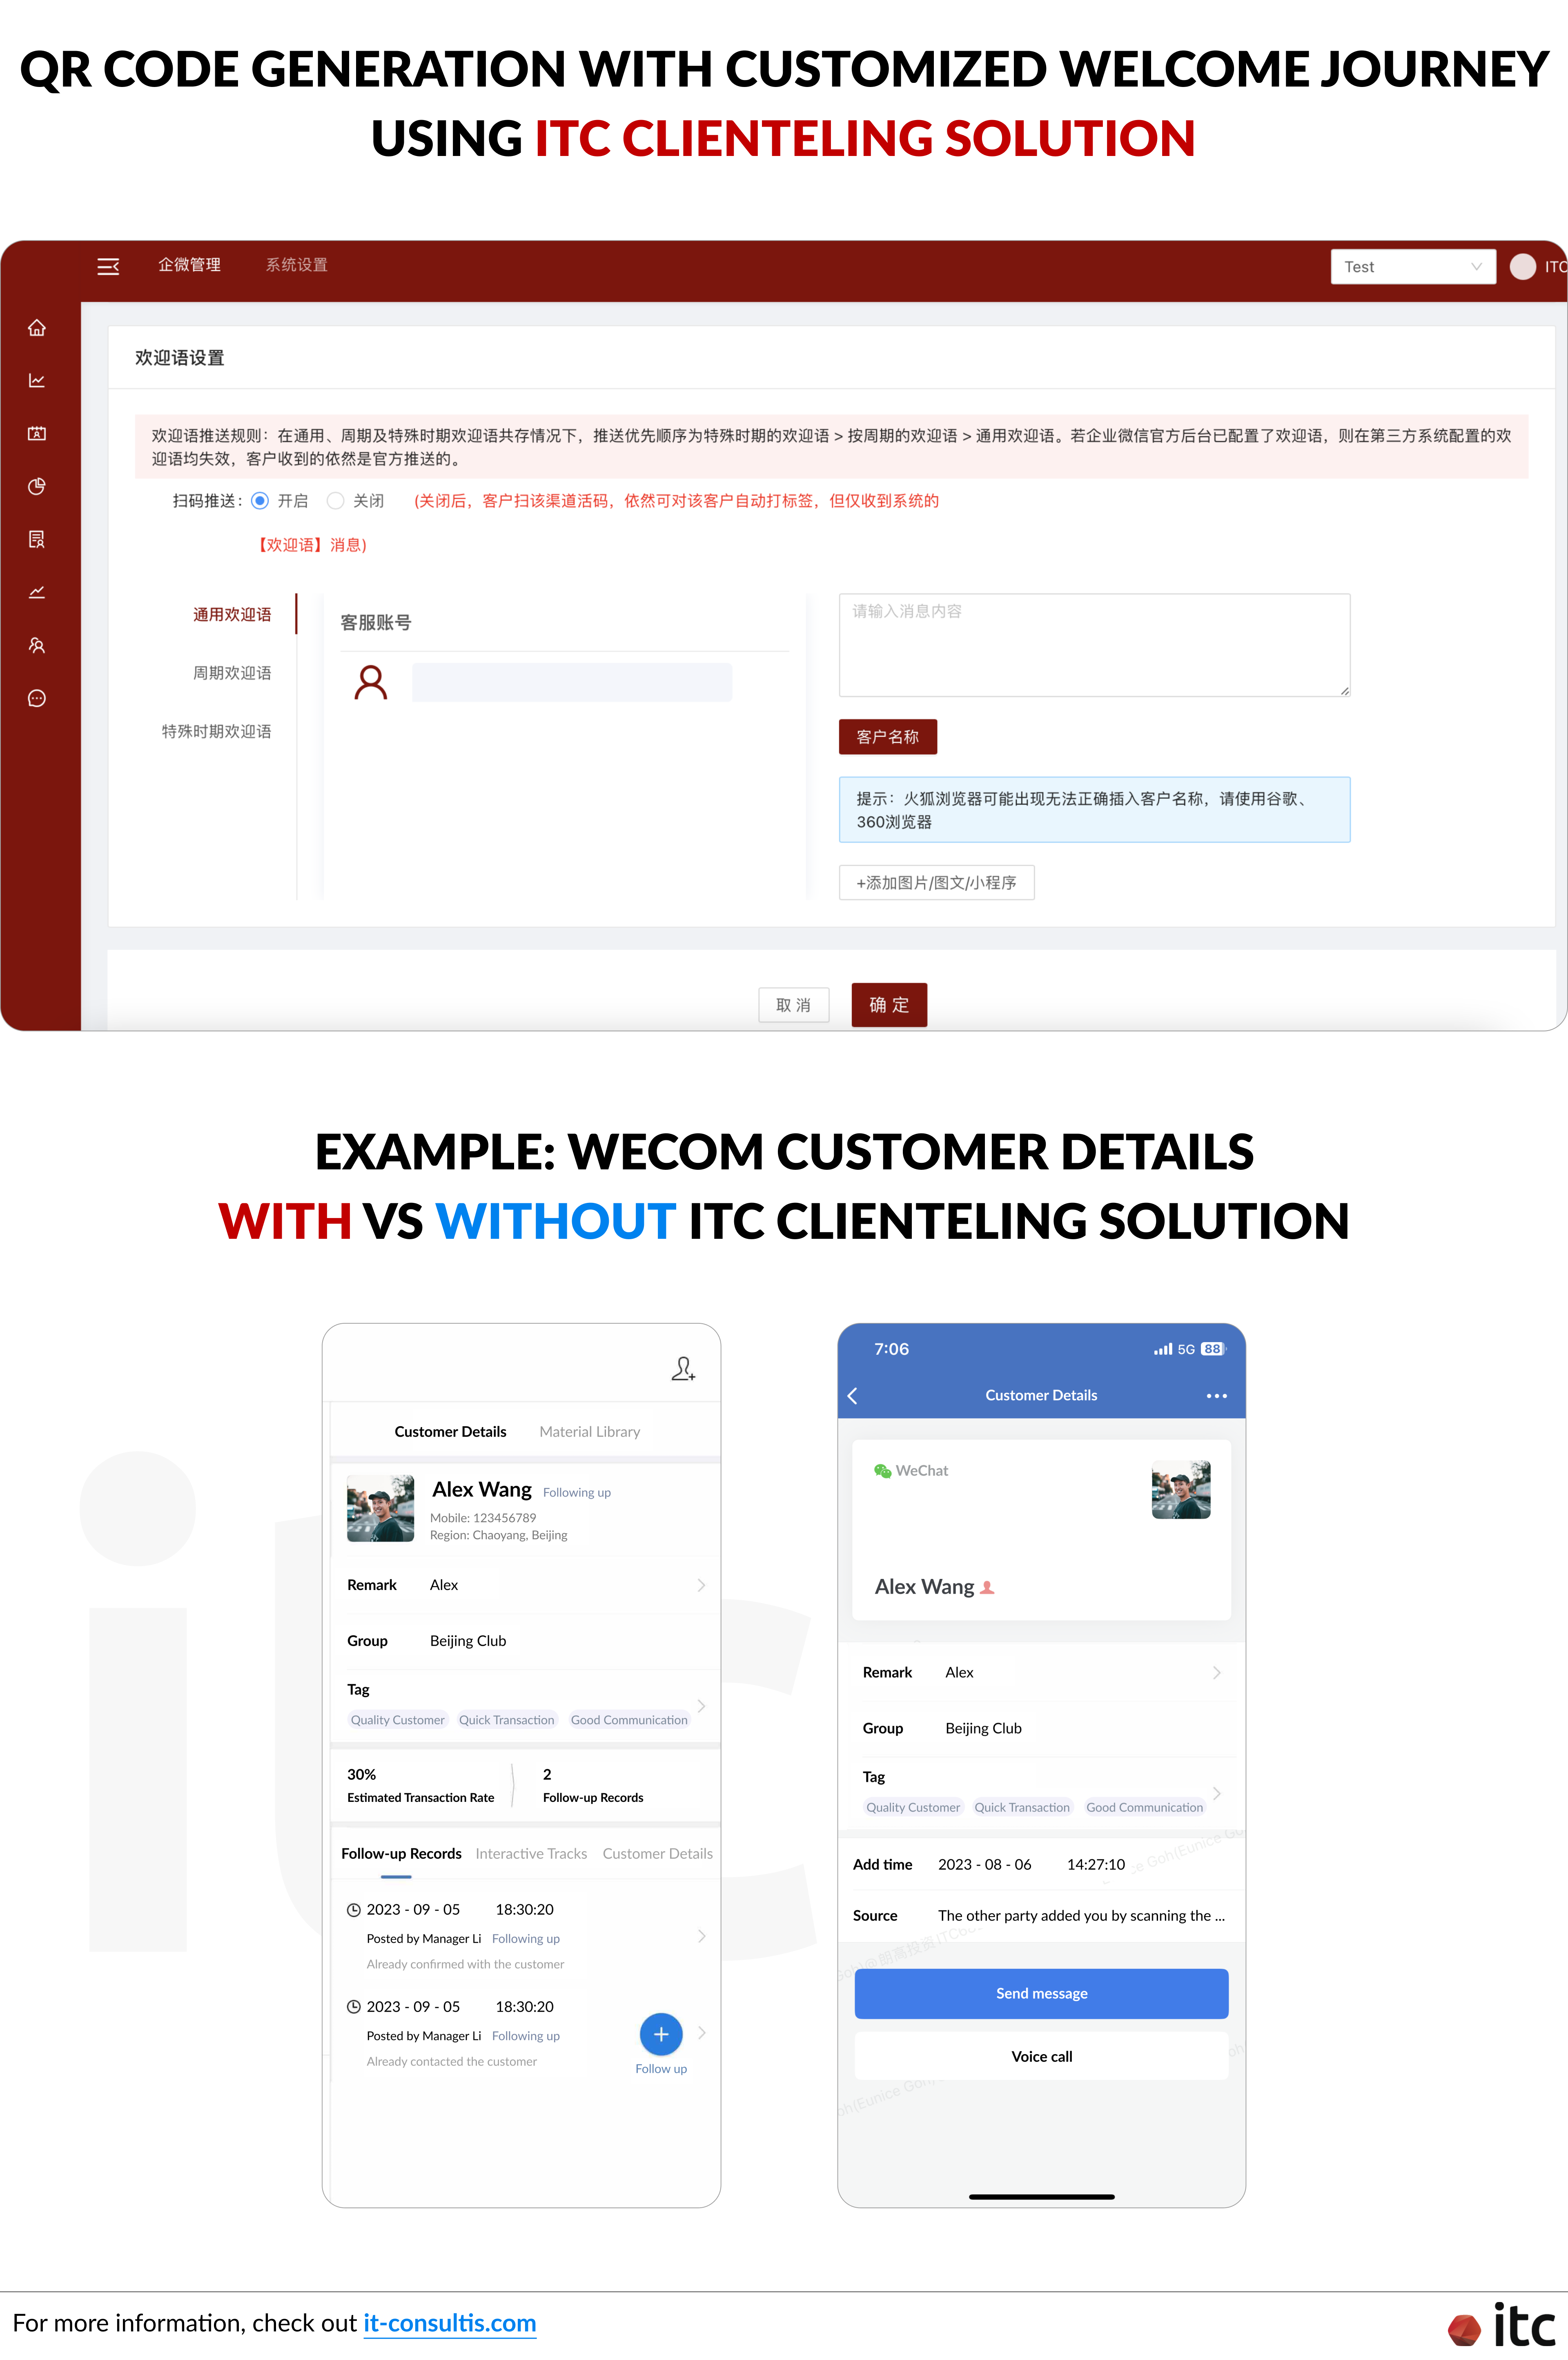 ITC Clienteling Solution for parametric WeCom QR code generation with customized welcome journey and more detailed display of WeCom customer details